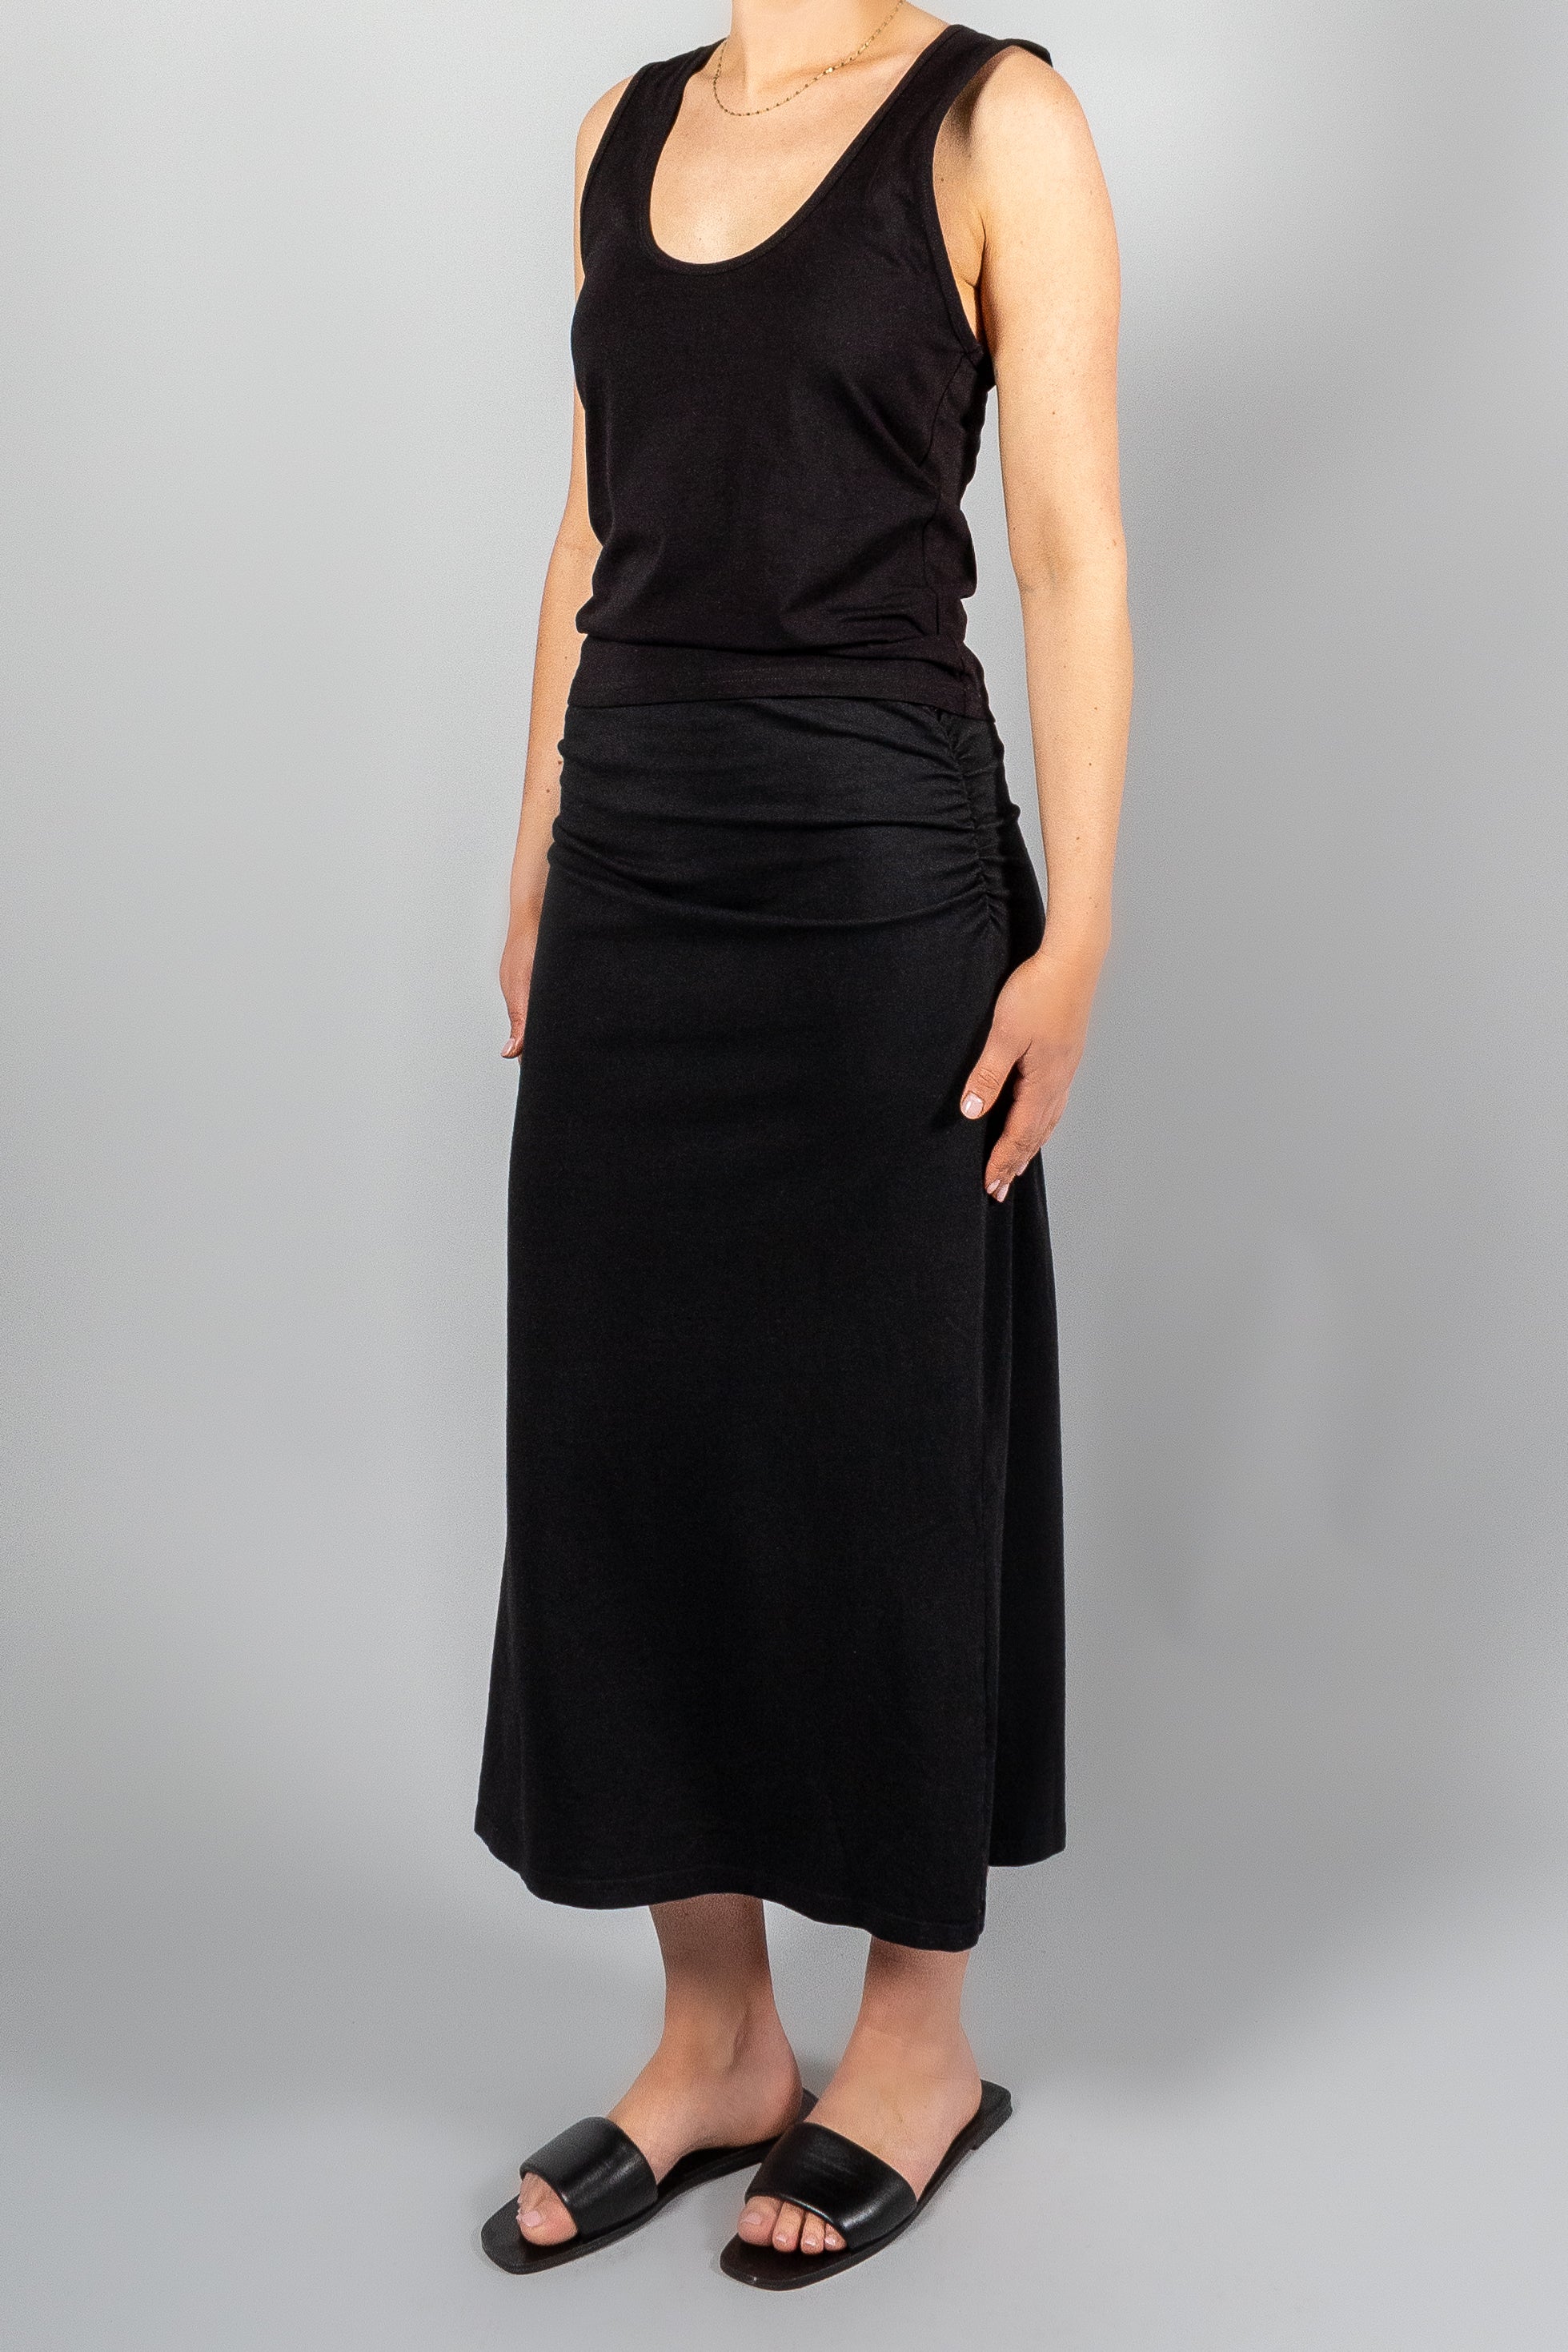 Xirena Lenny Skirt-Skirts-Misch-Boutique-Vancouver-Canada-misch.ca